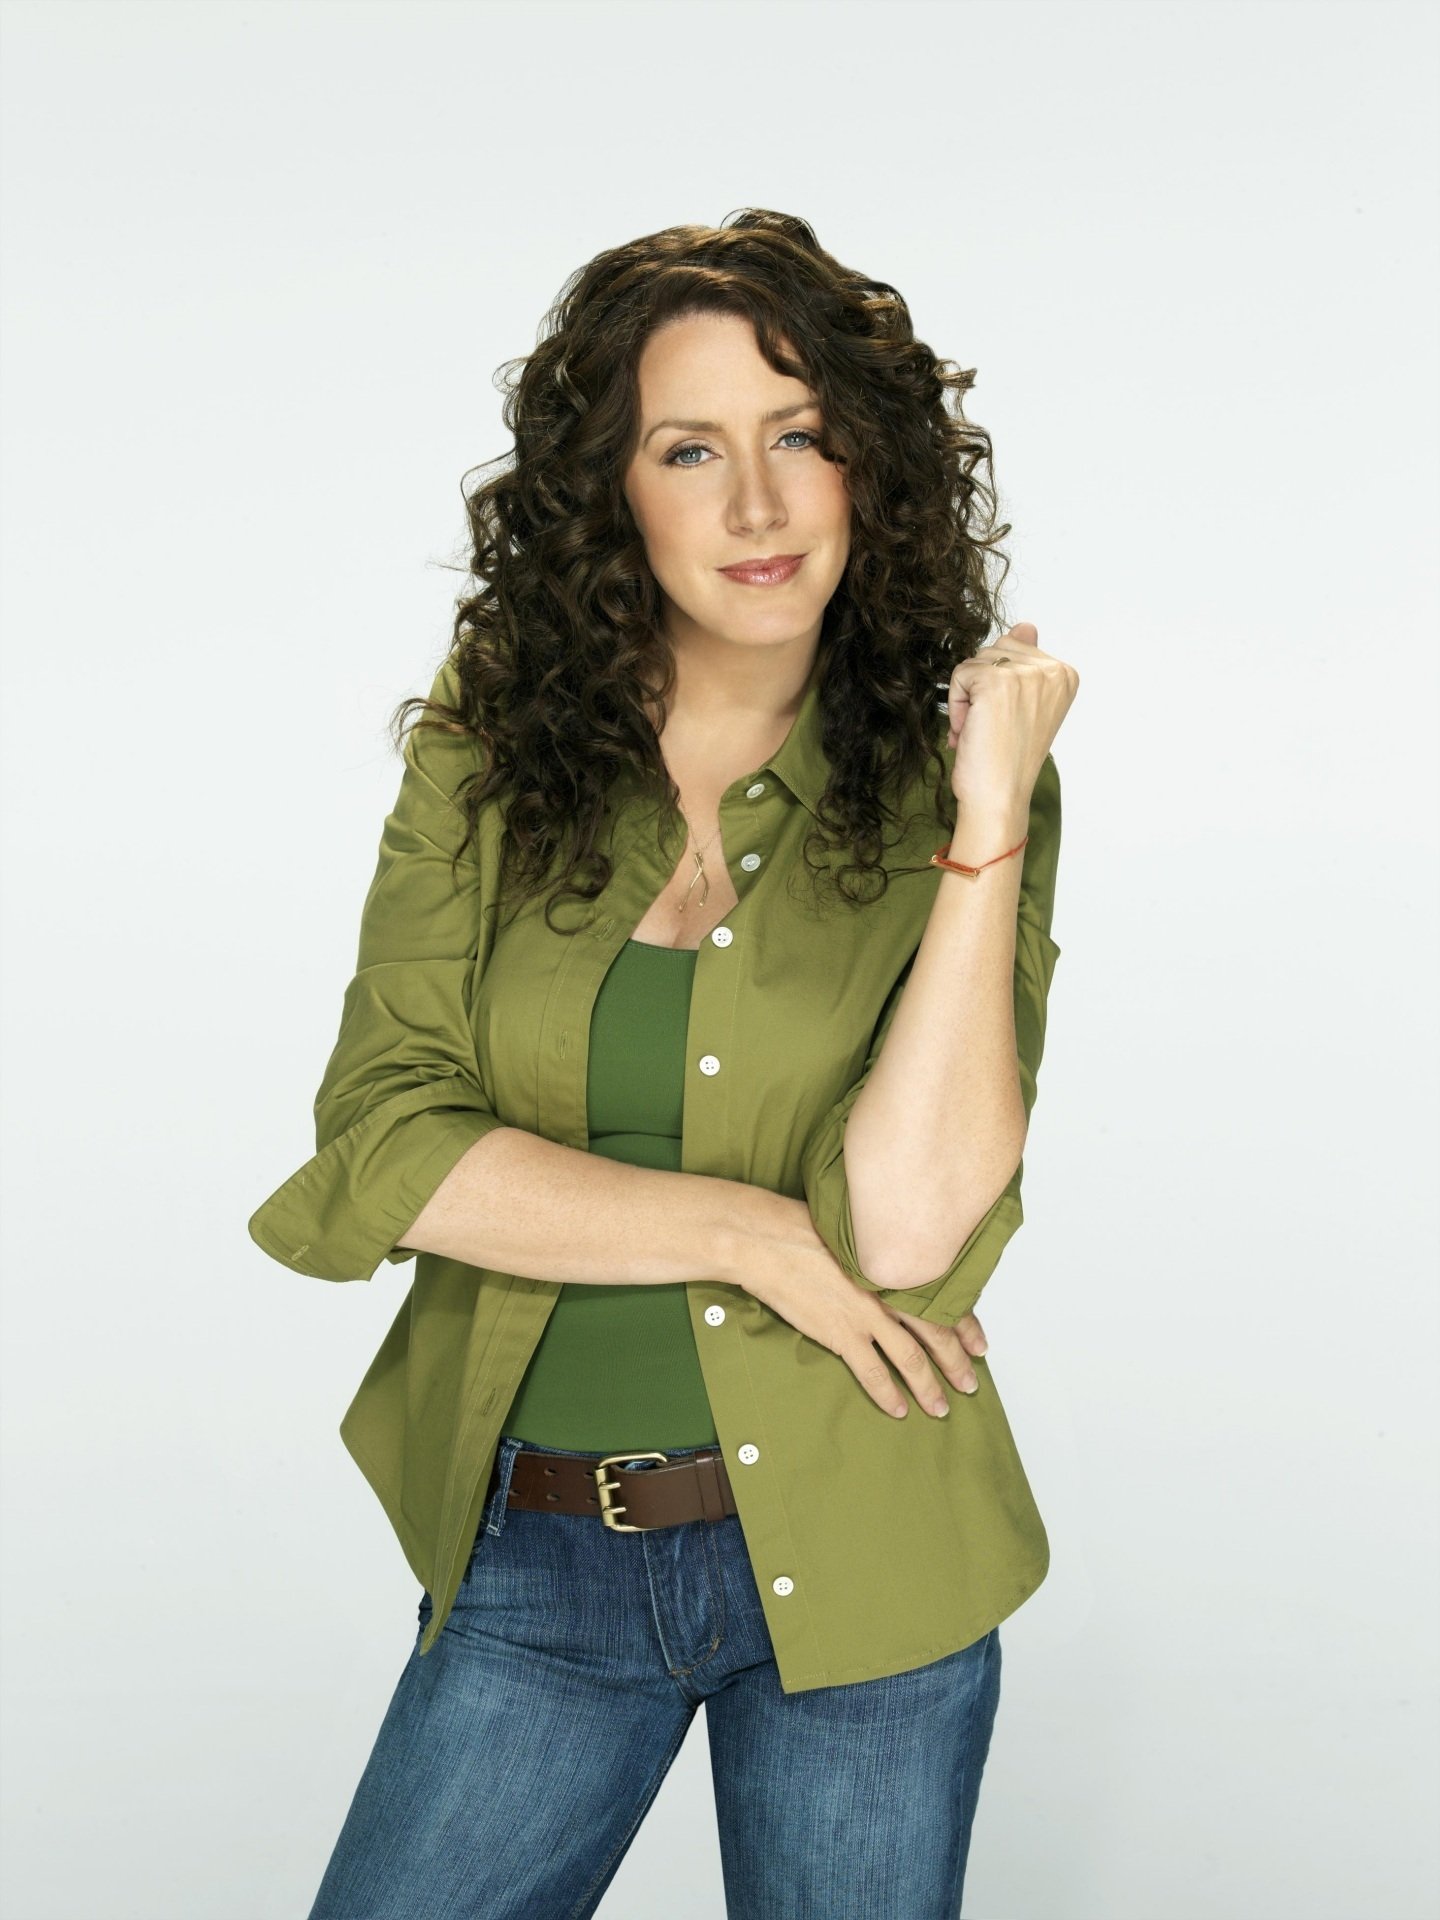 Joely fisher sex